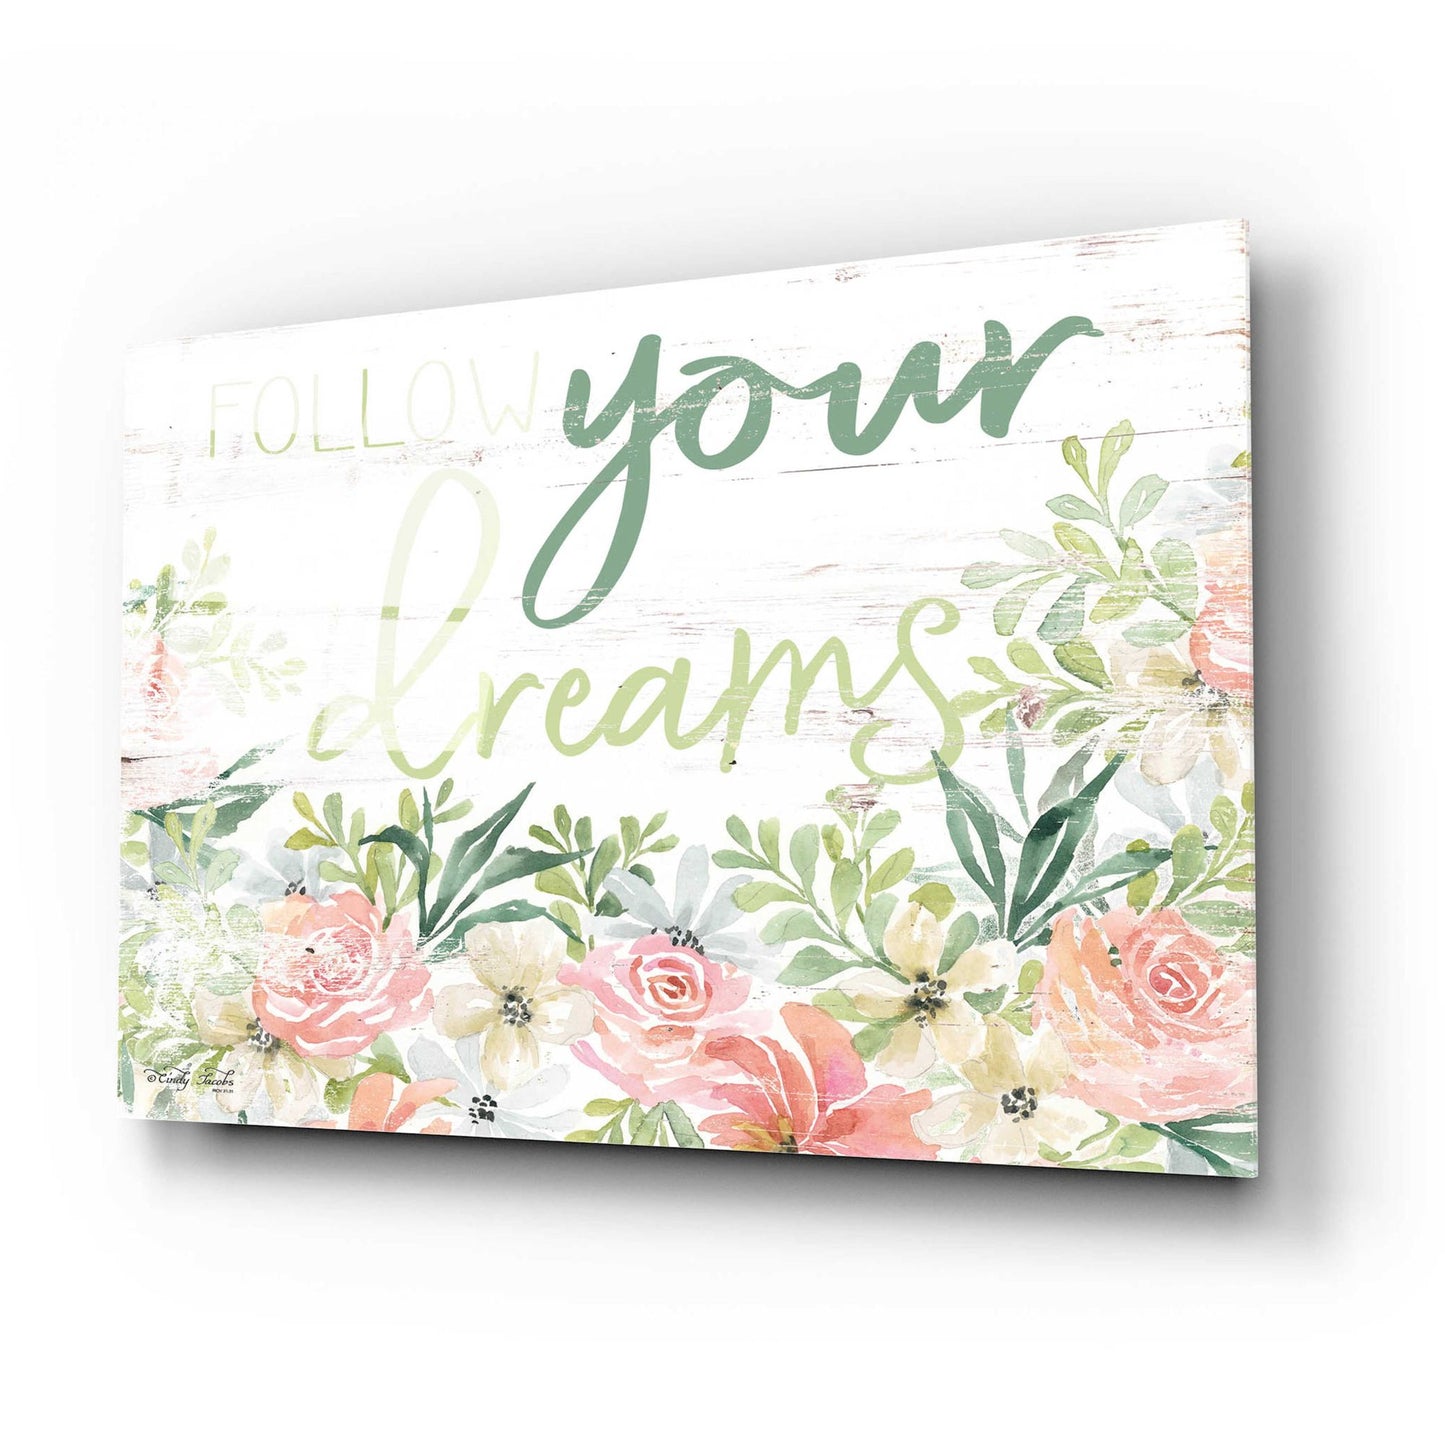 Epic Art 'Floral Follow Your Dreams' by Cindy Jacobs, Acrylic Glass Wall Art,24x16